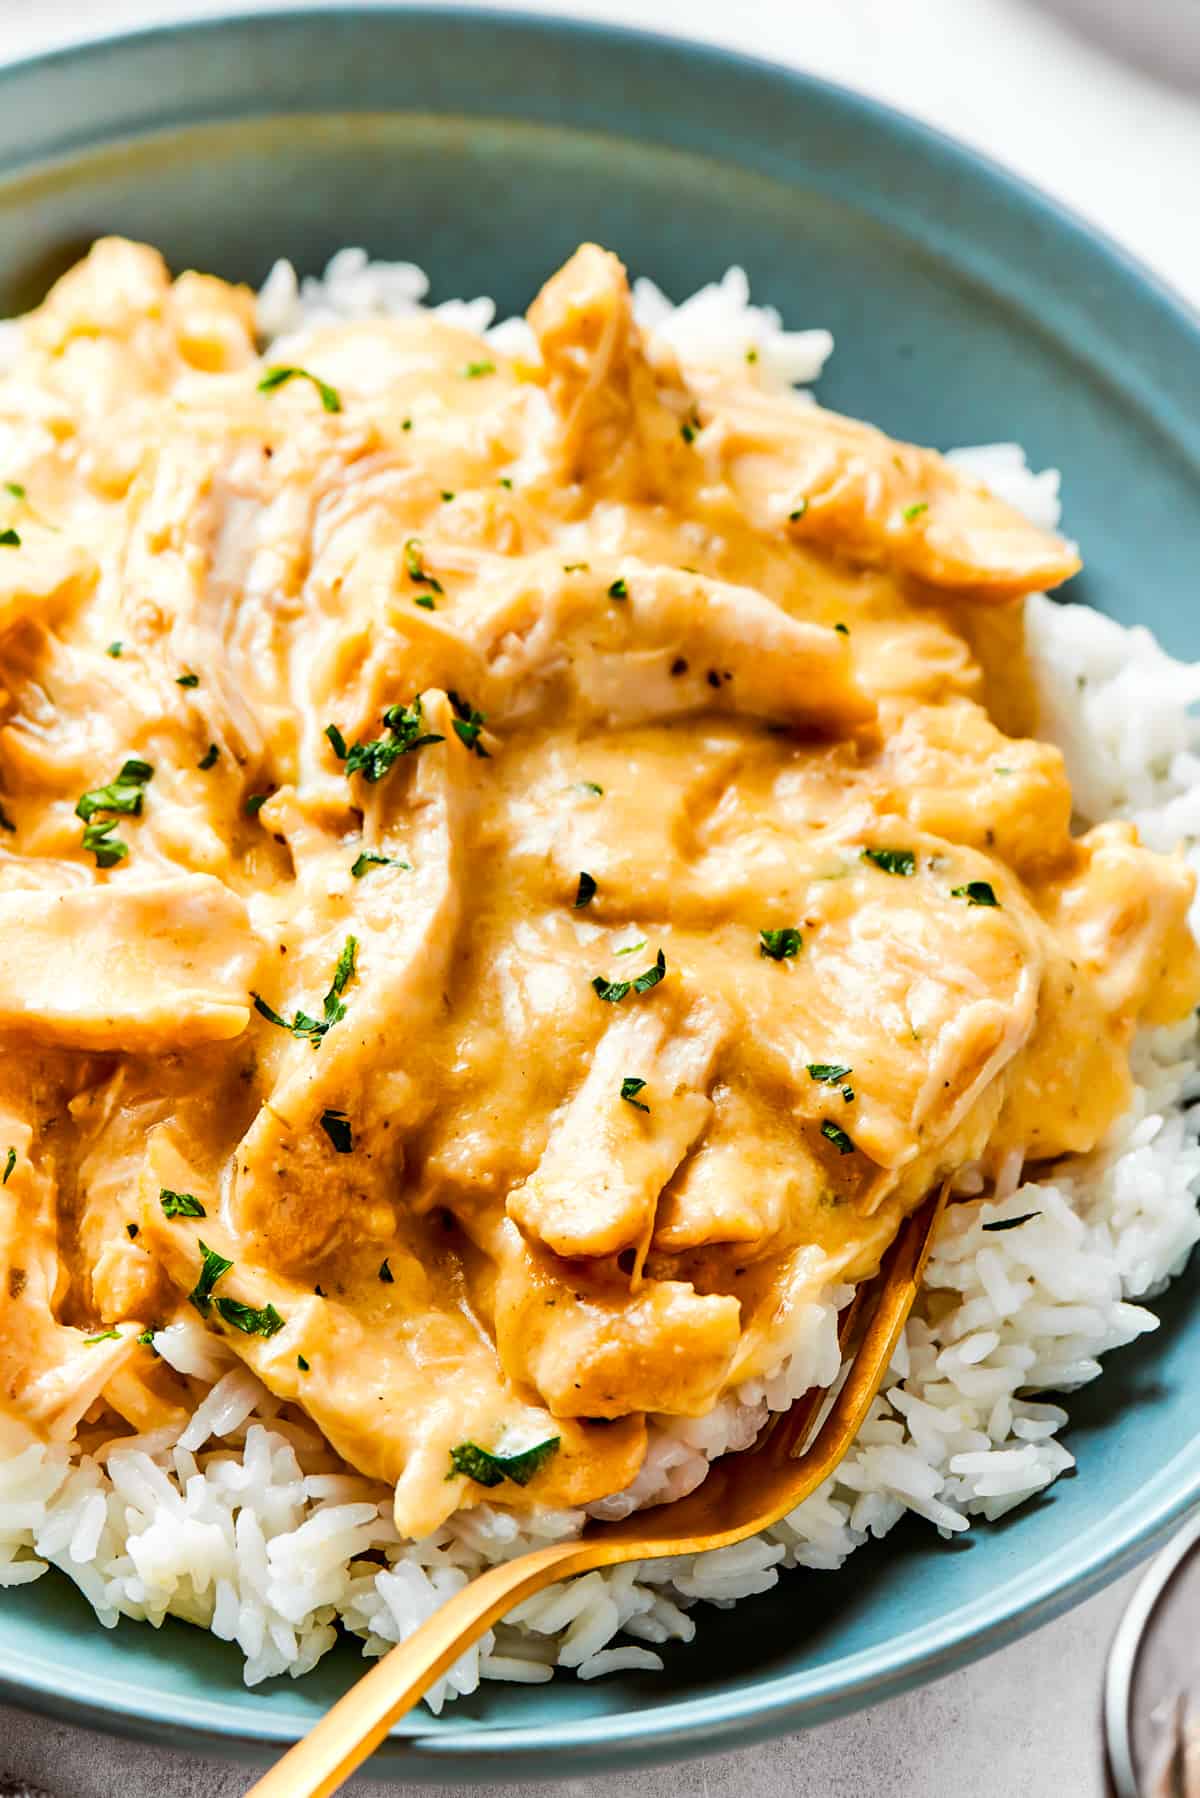 Close-up image of chicken and gravy served over rice on a dinner plate.